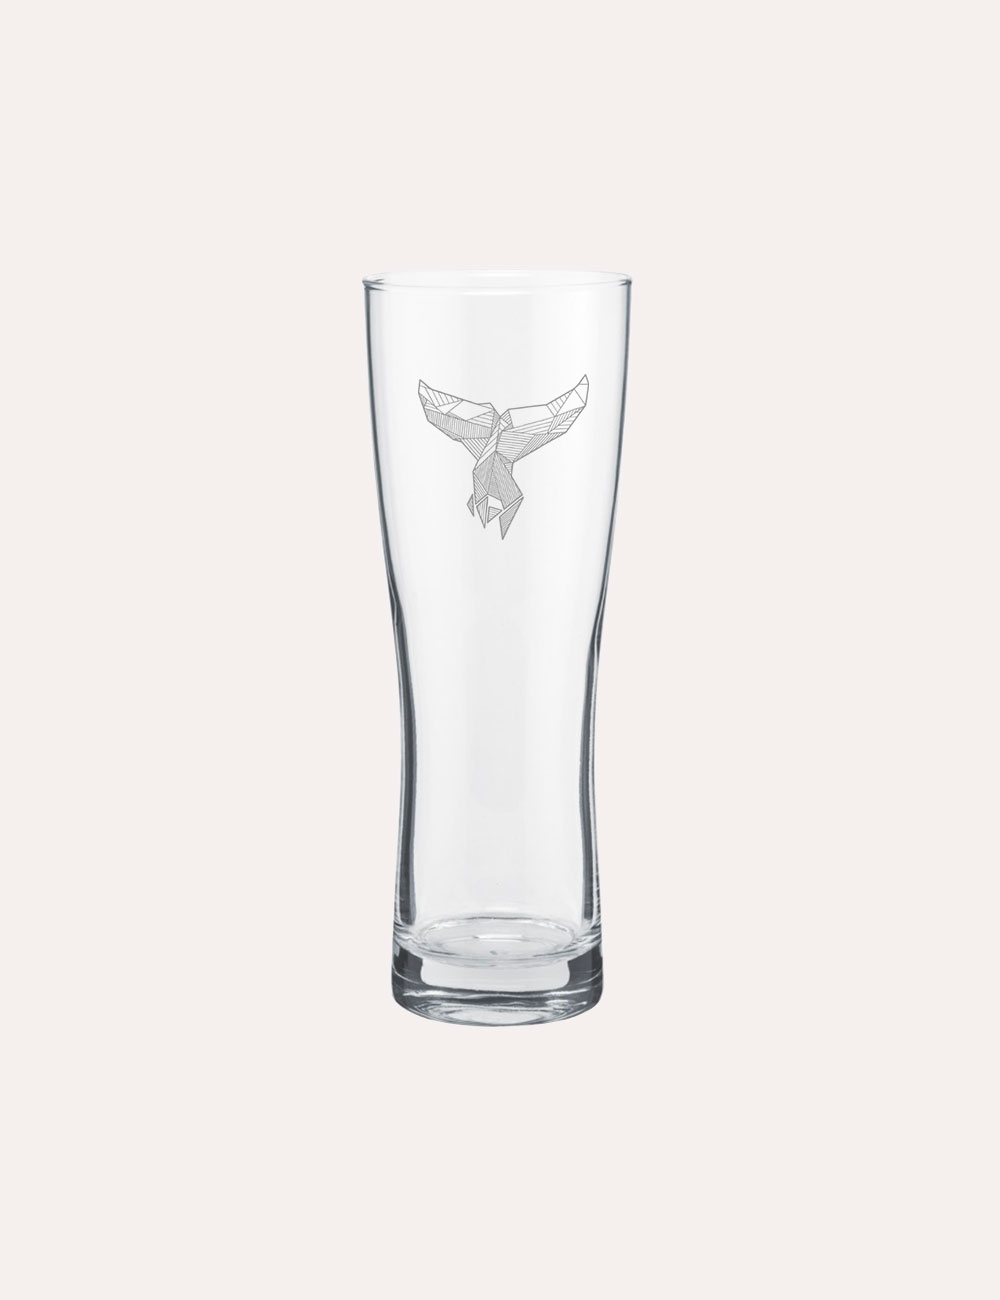 The Whale: A Craft Beer Collective - Asheville - Glassware - 20oz. Pilsner Glass